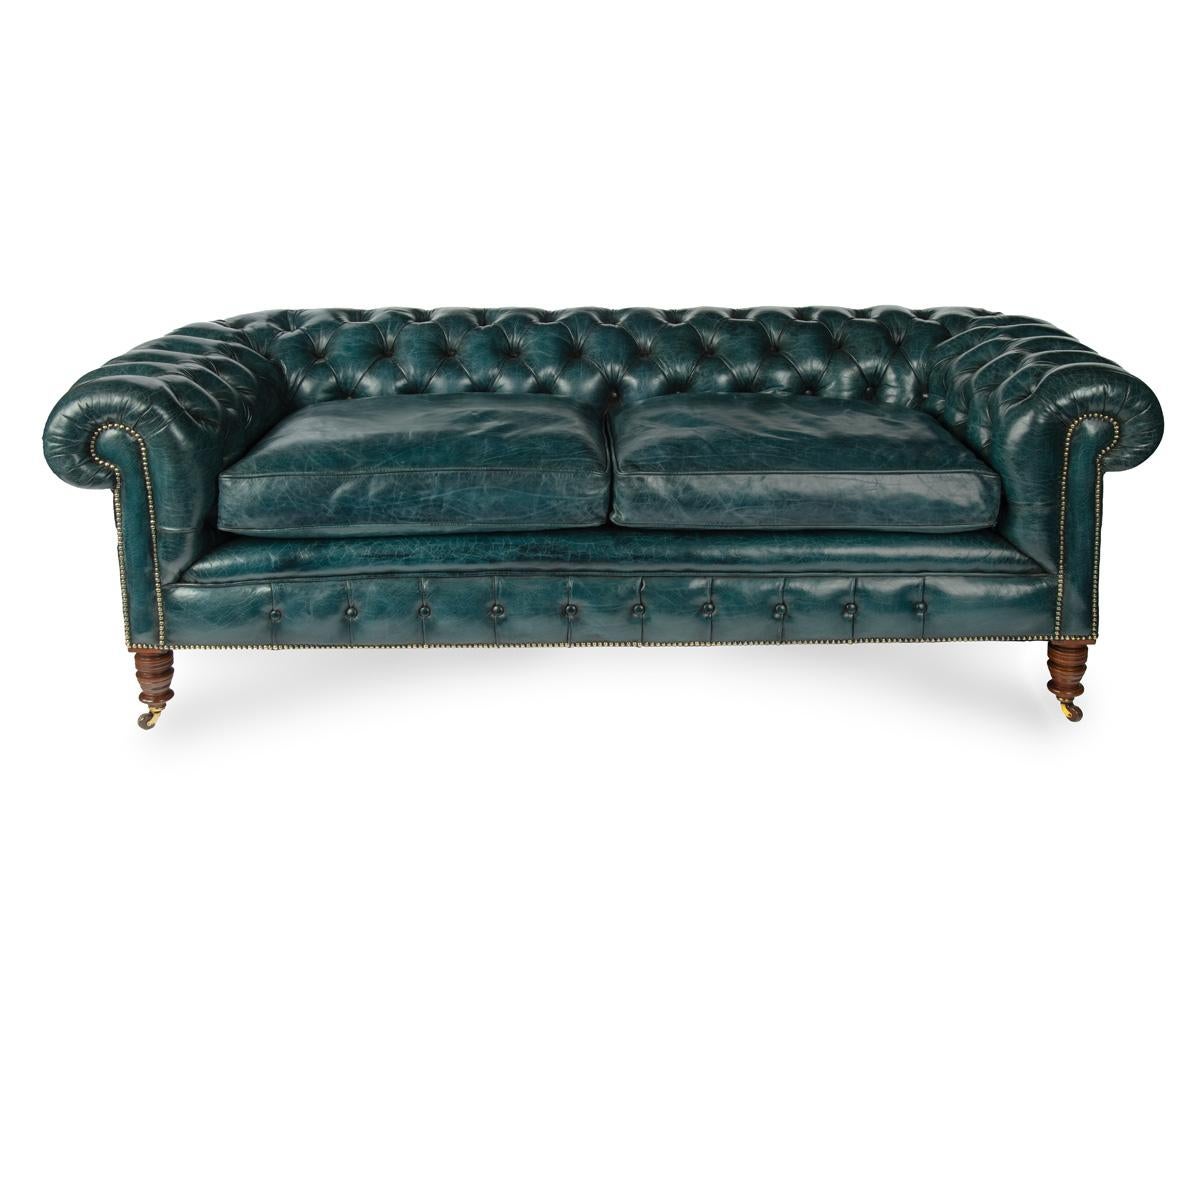 A late Victorian two-seater Chesterfield sofa, of typical form with a continuous scroll back and arms, reupholstered in deep-buttoned blue leather, raised on turned tapering walnut legs with the original castors.  English, circa 1900.

